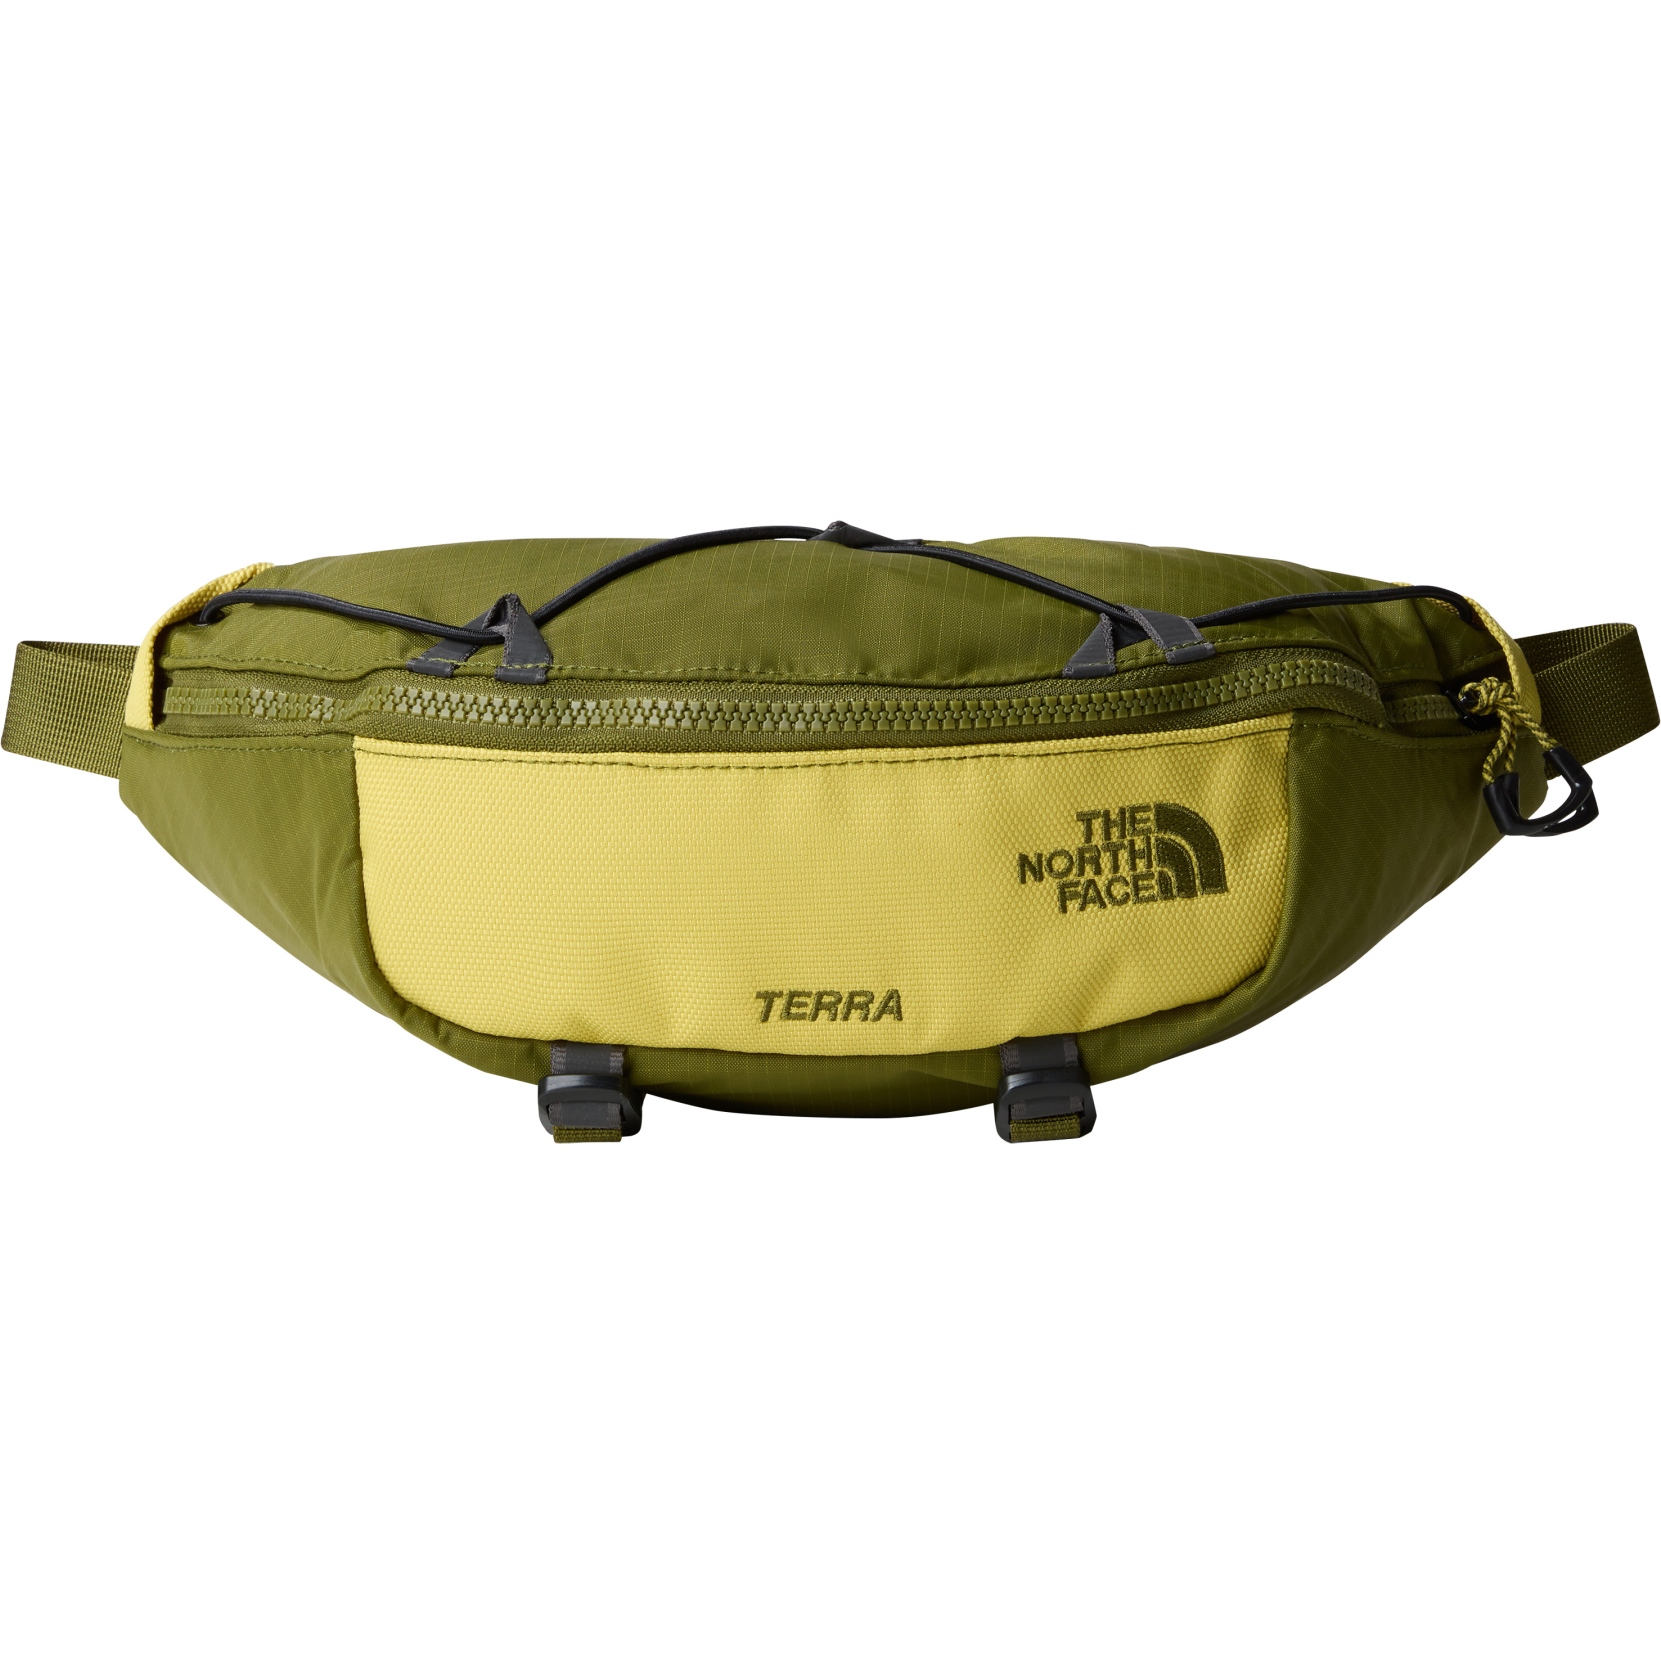 Picture of The North Face Terra 3L Bum Bag - Forest Olive/Yellow Silt